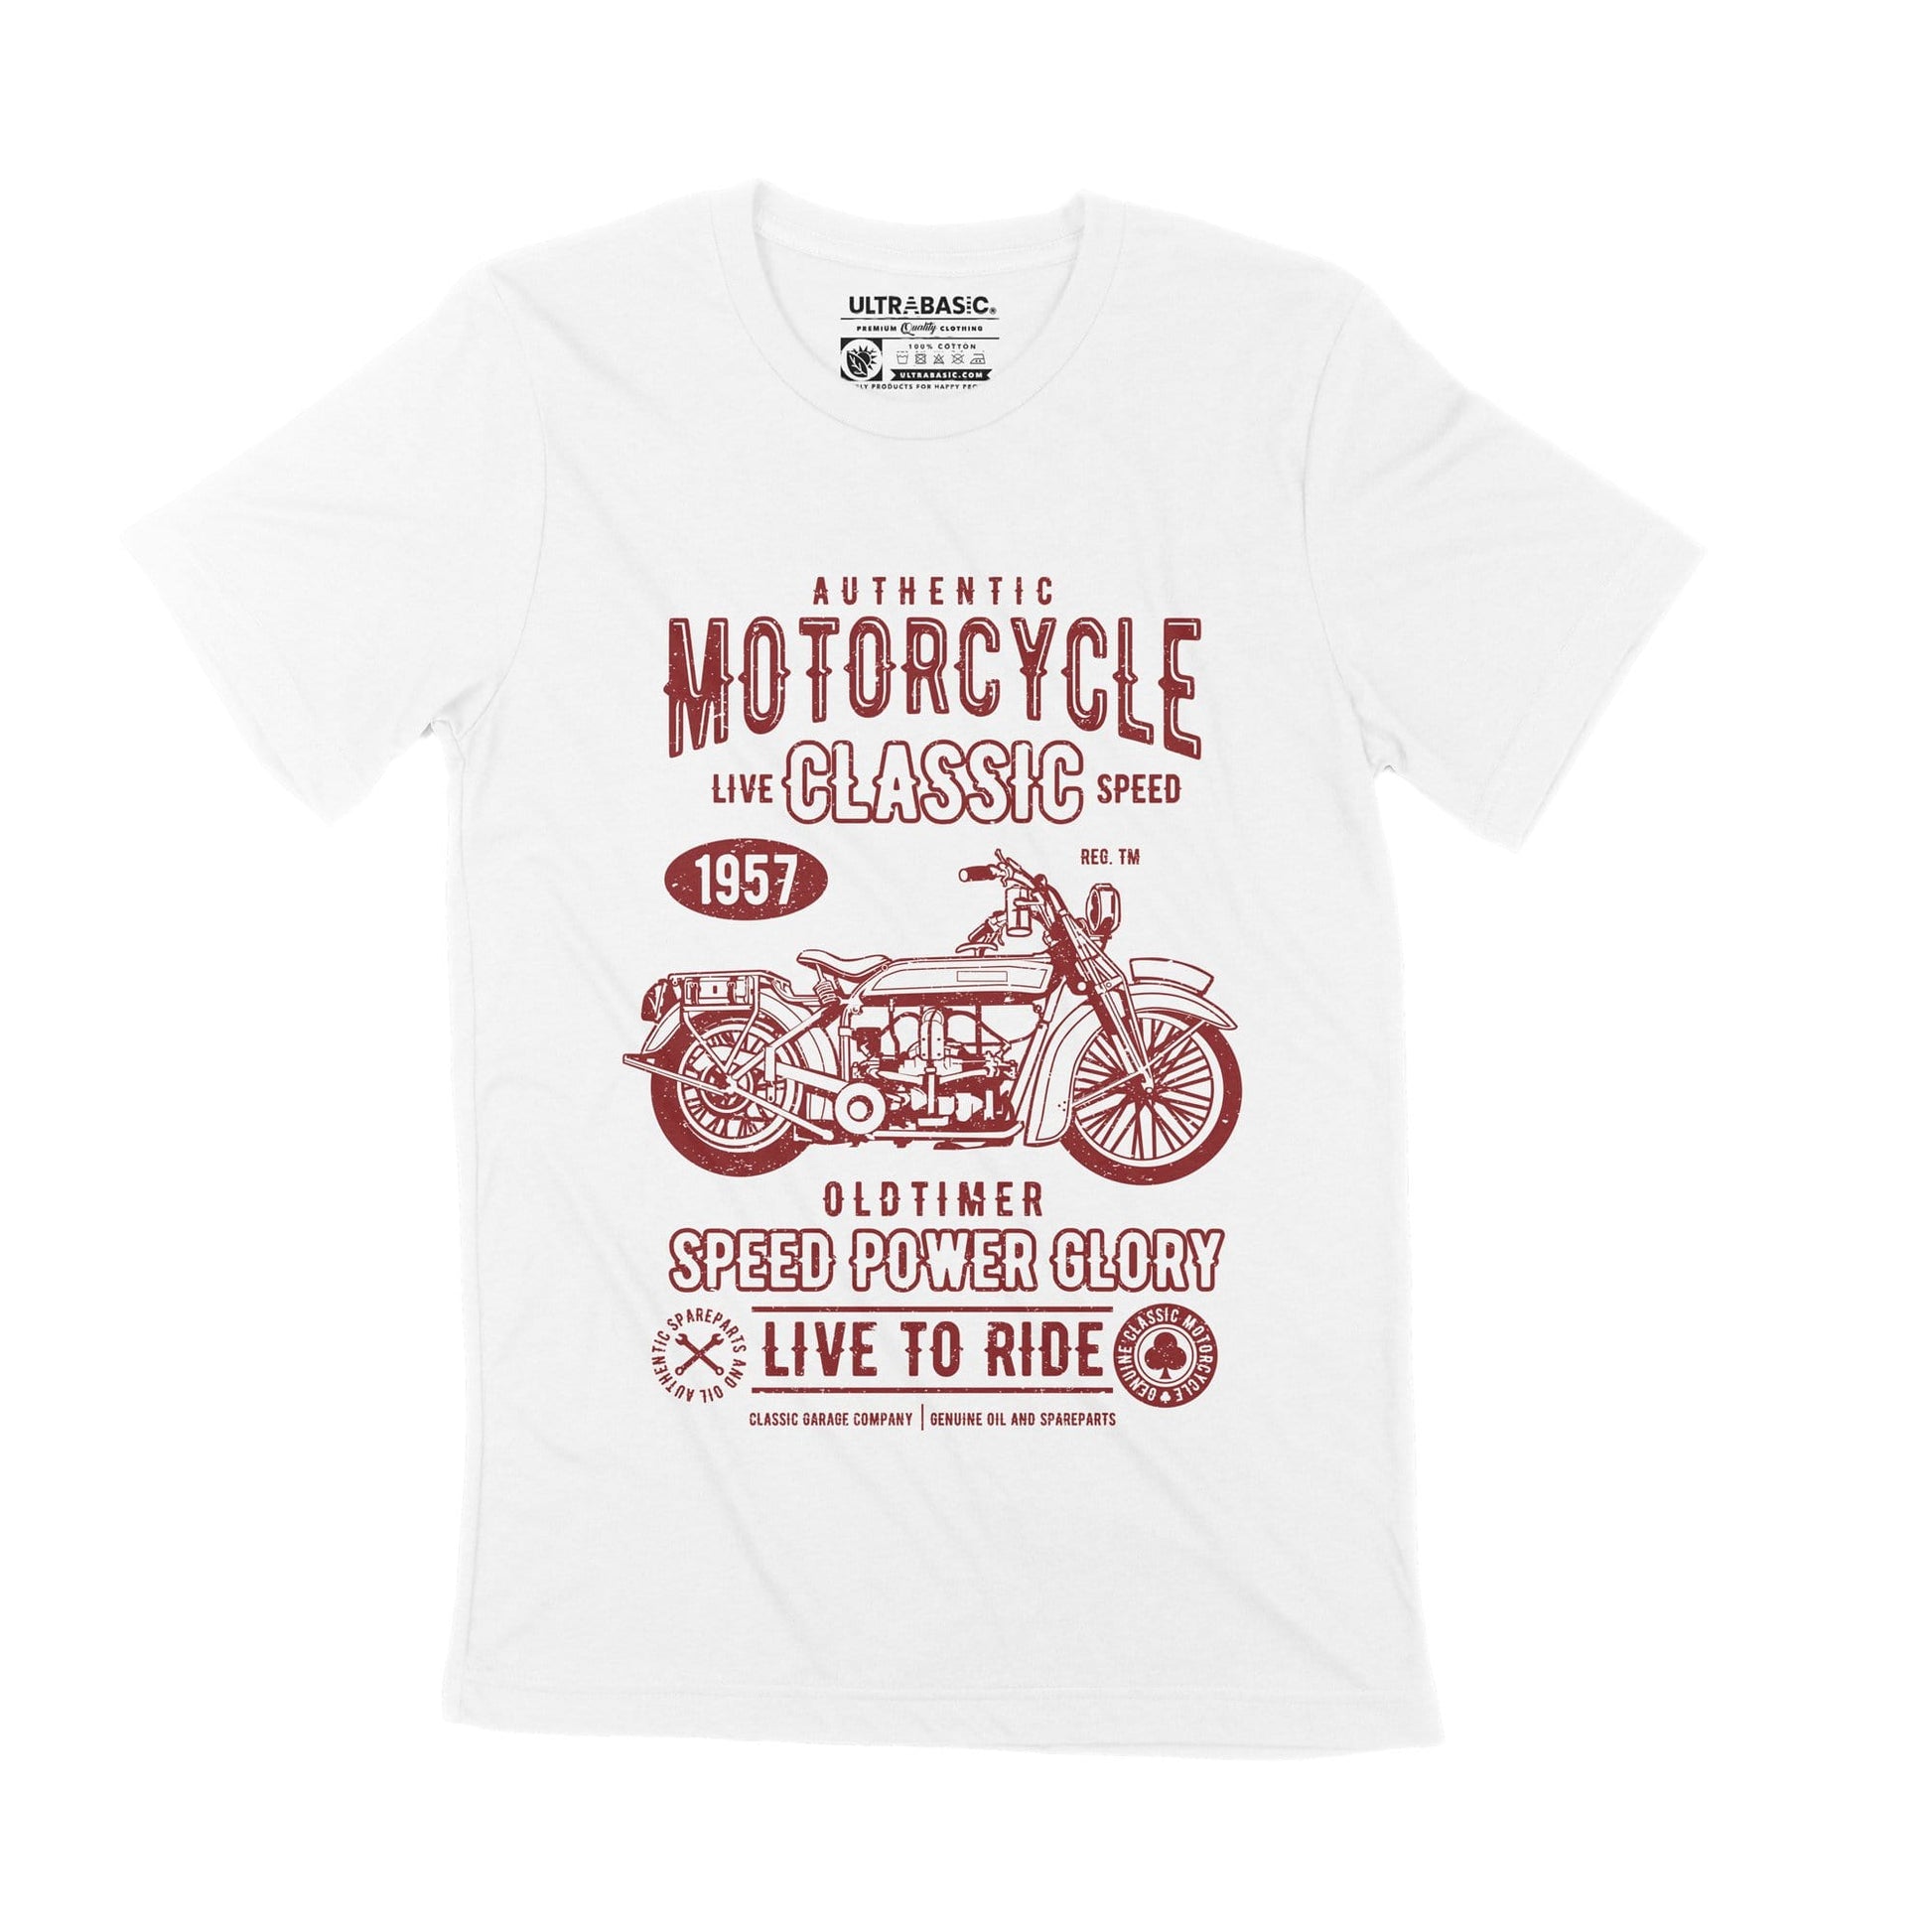 ULTRABASIC Men's T-Shirt Authentic Motorcycle Classic 1957 - Vintage Biker Tee  life behind bars engine ride mechanic clothes oldtimer clothing outdoor fashion victory hot rod outfits usa guy apparel tees unisex motorbike genuine motorcycles merchandise highway biker speed street casual fast dad fathers day racer slogan